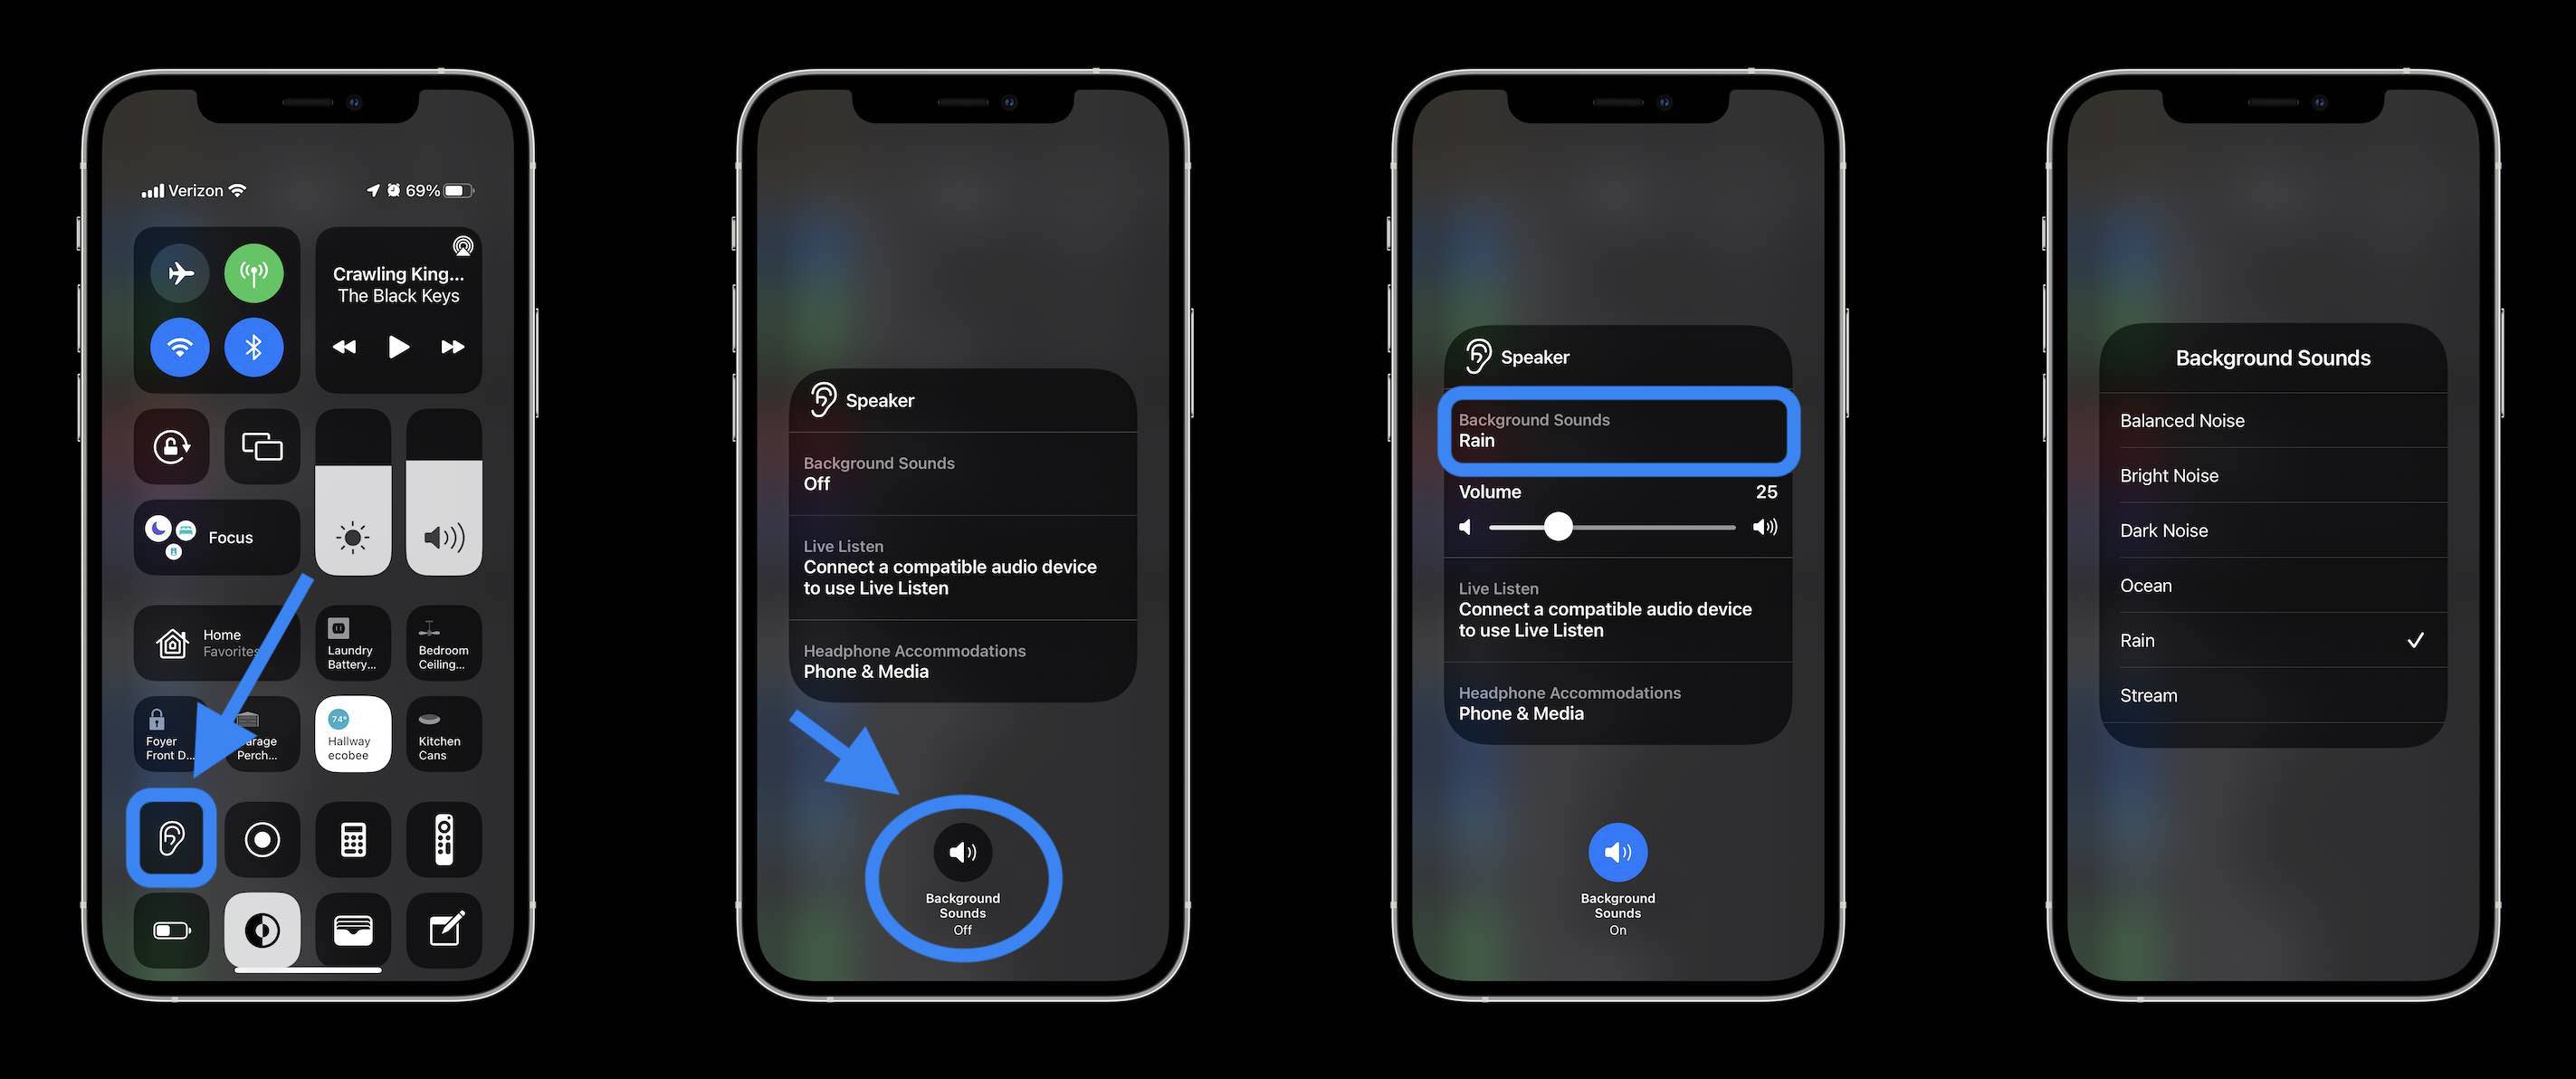 How to use iPhone Background Sounds in iOS 15 Control Center